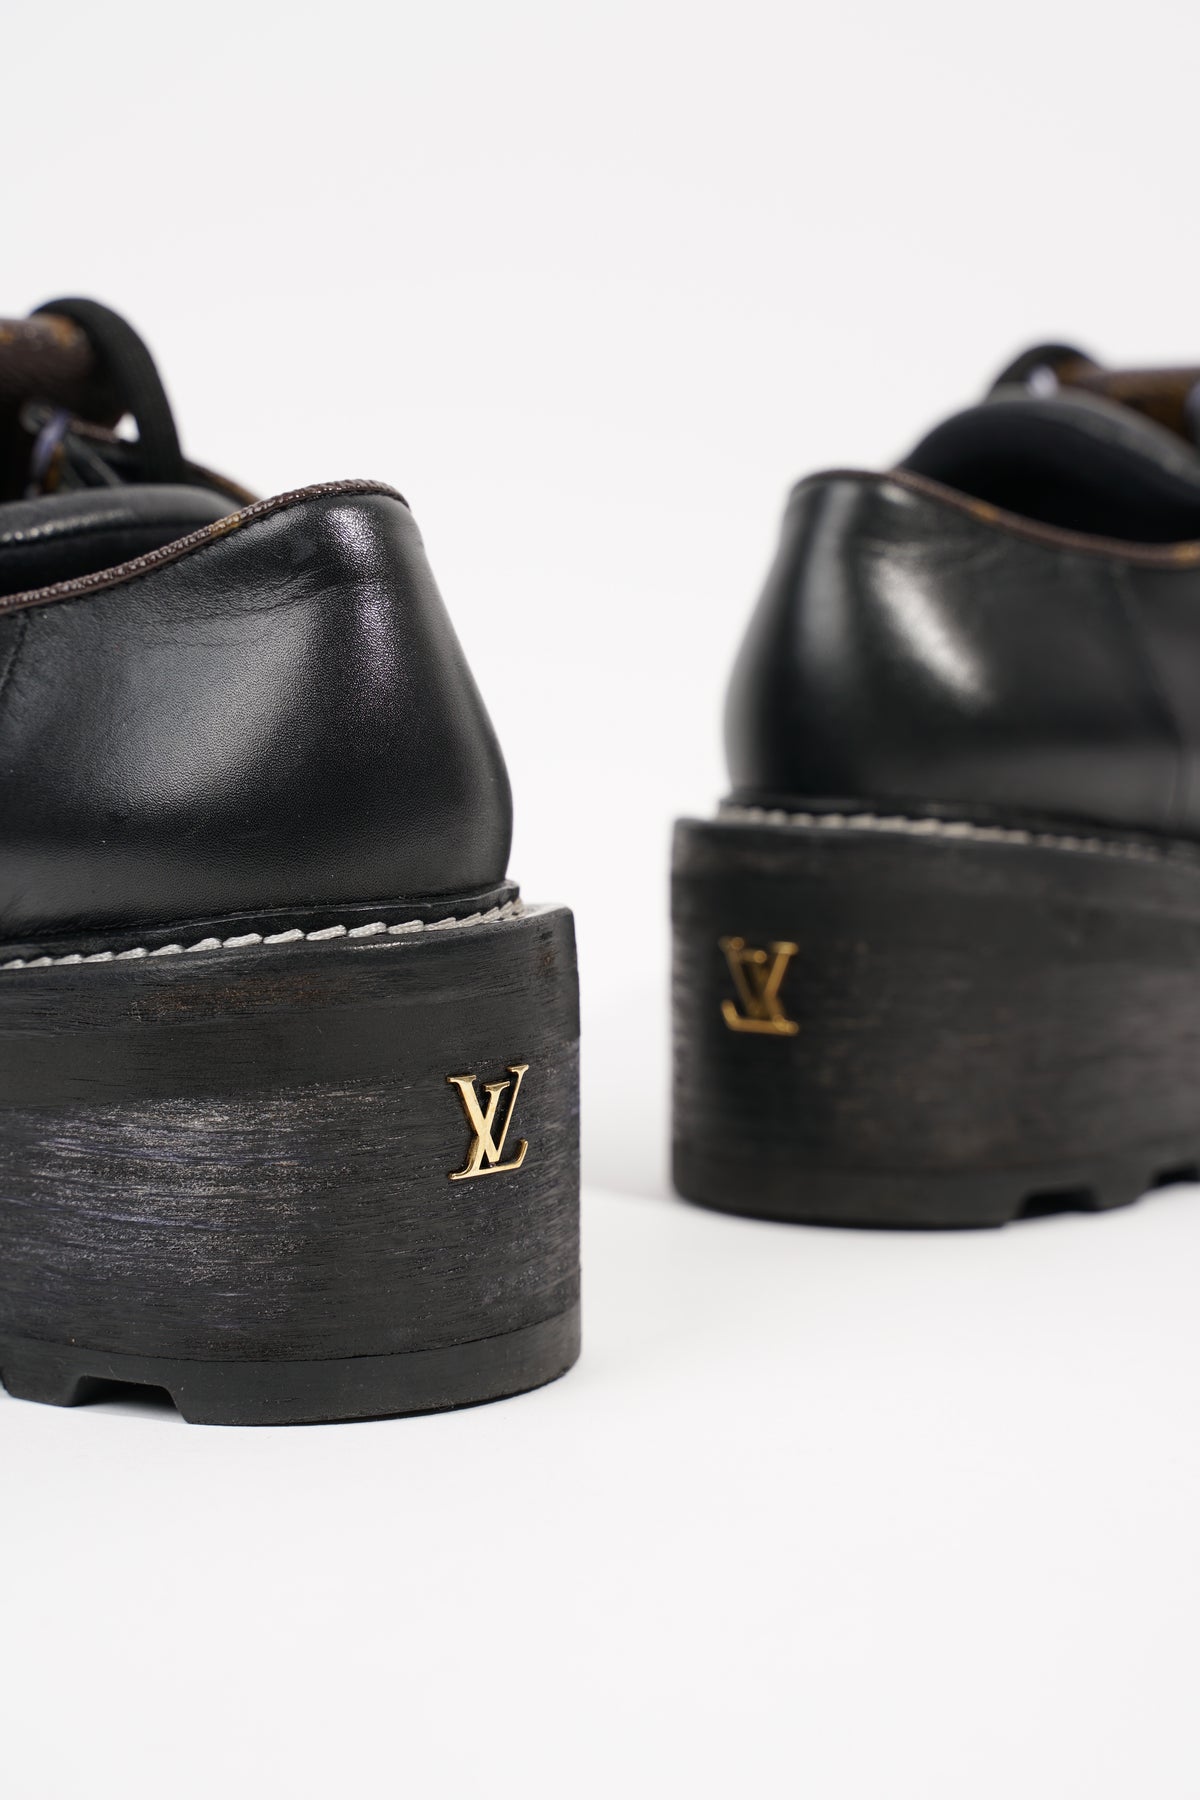 Lv Beaubourg Open Back Derby